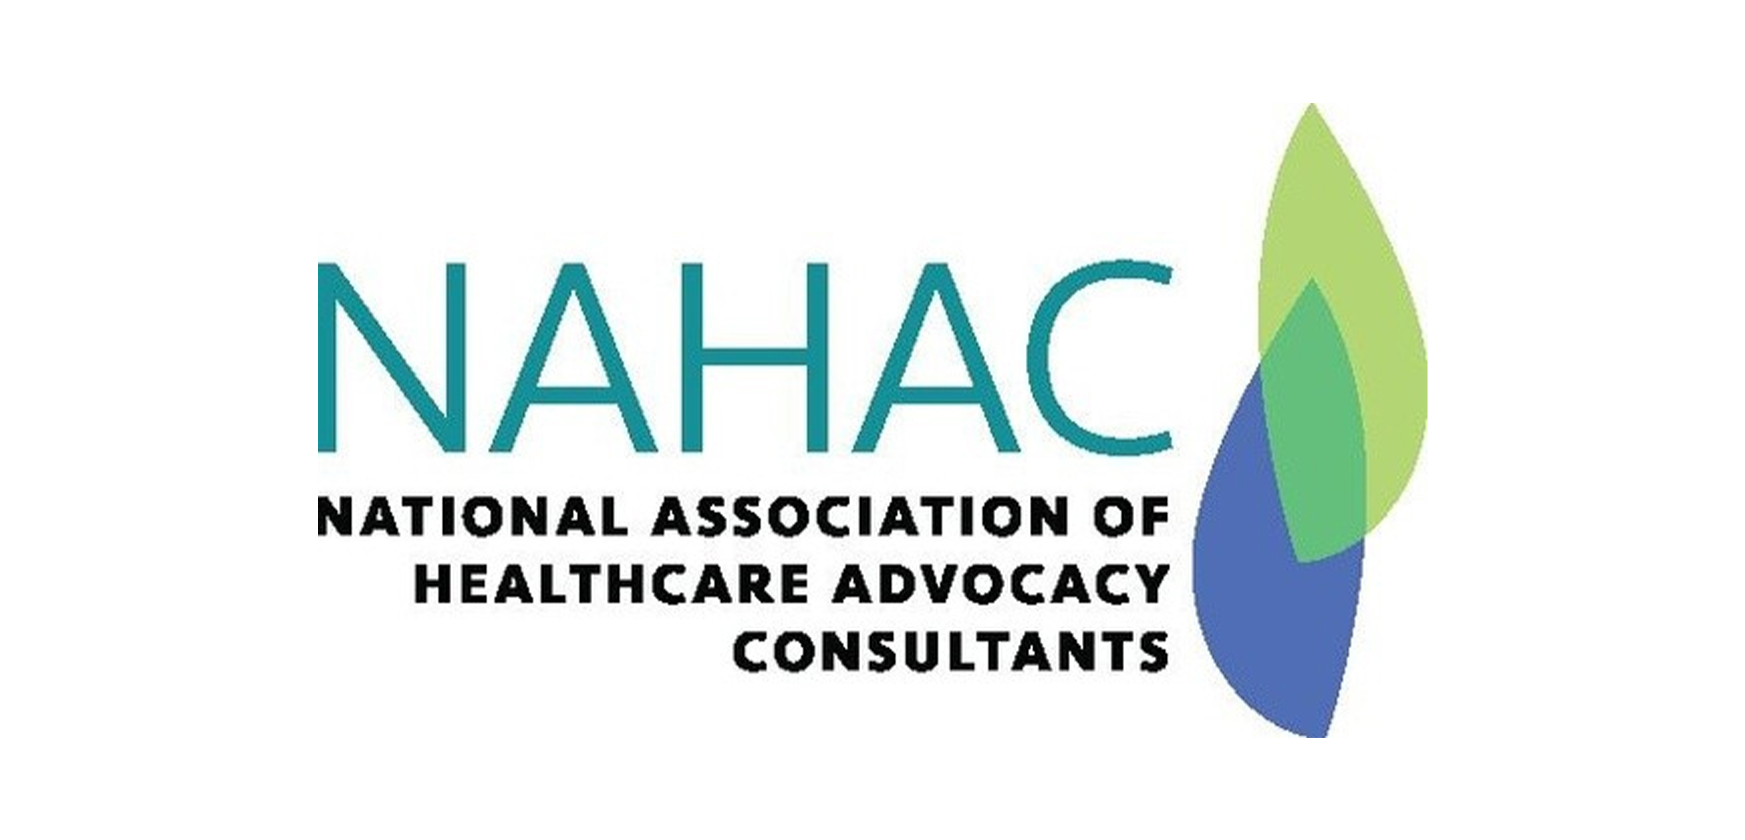 National Association of Healthcare Advocacy Consultants